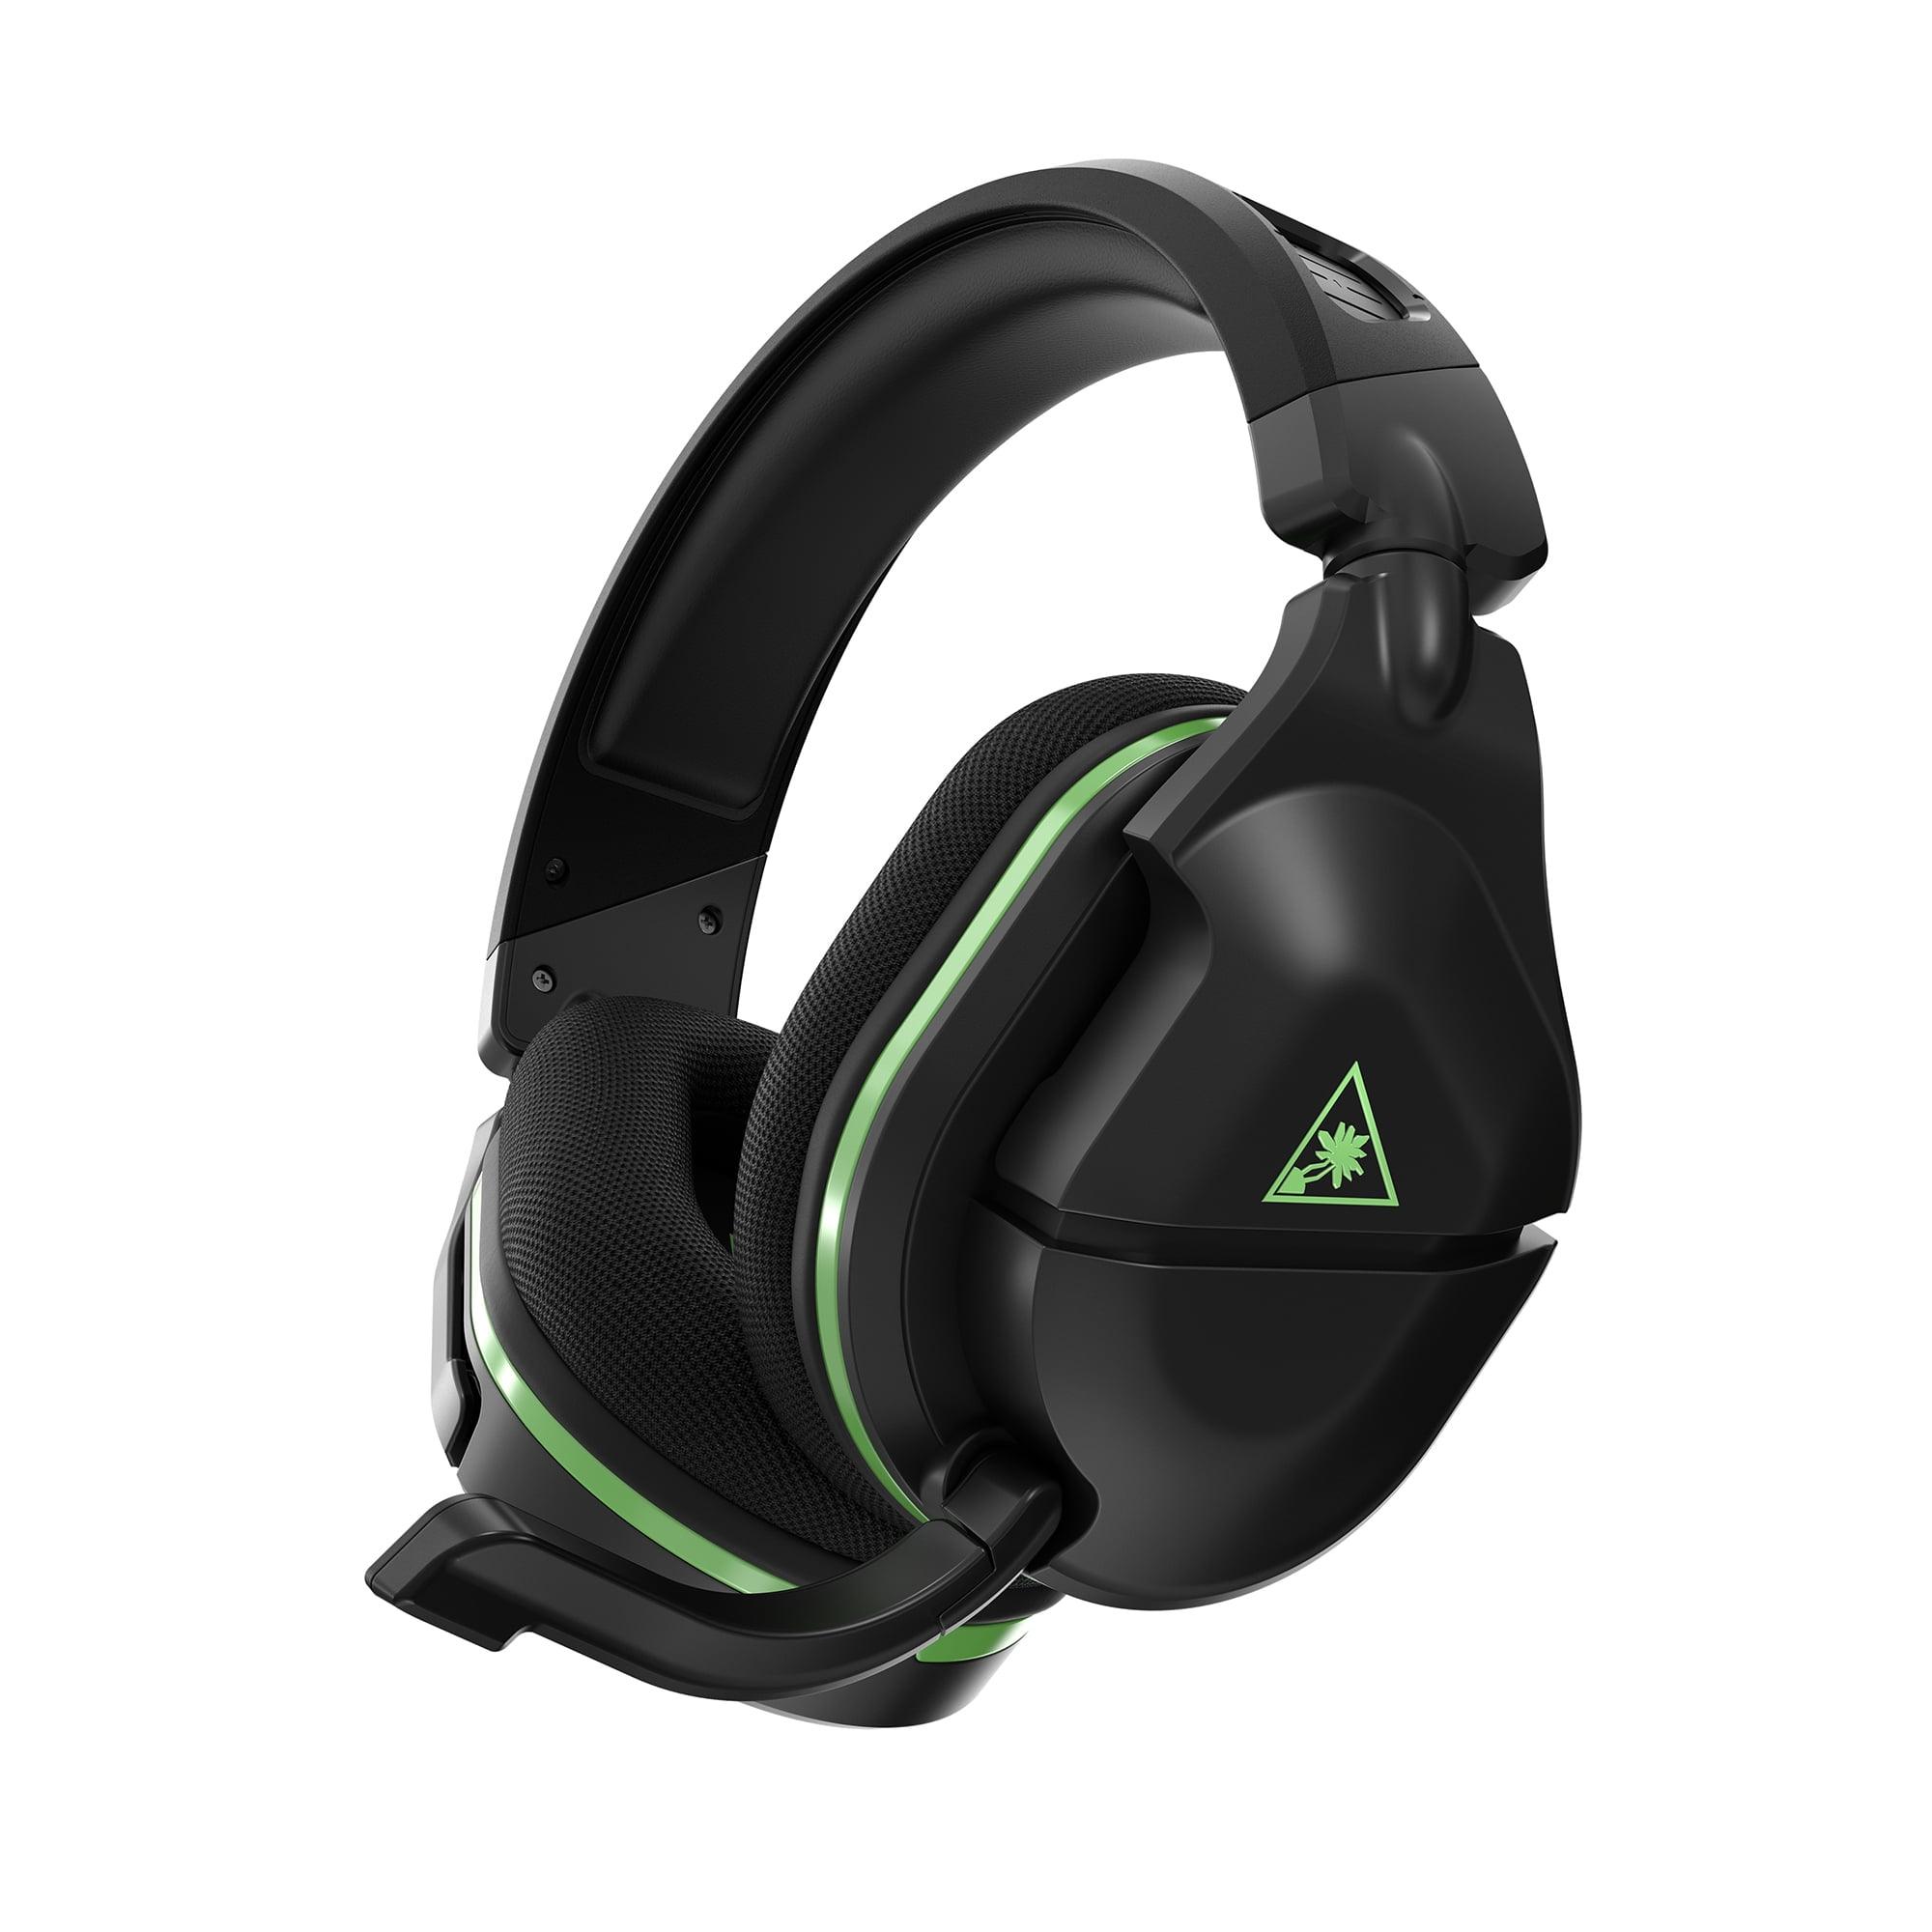 Arrangement pessimist ødelagte Turtle Beach Stealth 600 Gen 2 USB Wireless Amplified Gaming Headset -  Licensed for Xbox Series X, Xbox Series S, & Xbox One - 24+ Hour Battery,  50mm Speakers, Flip-to-Mute Mic, Spatial